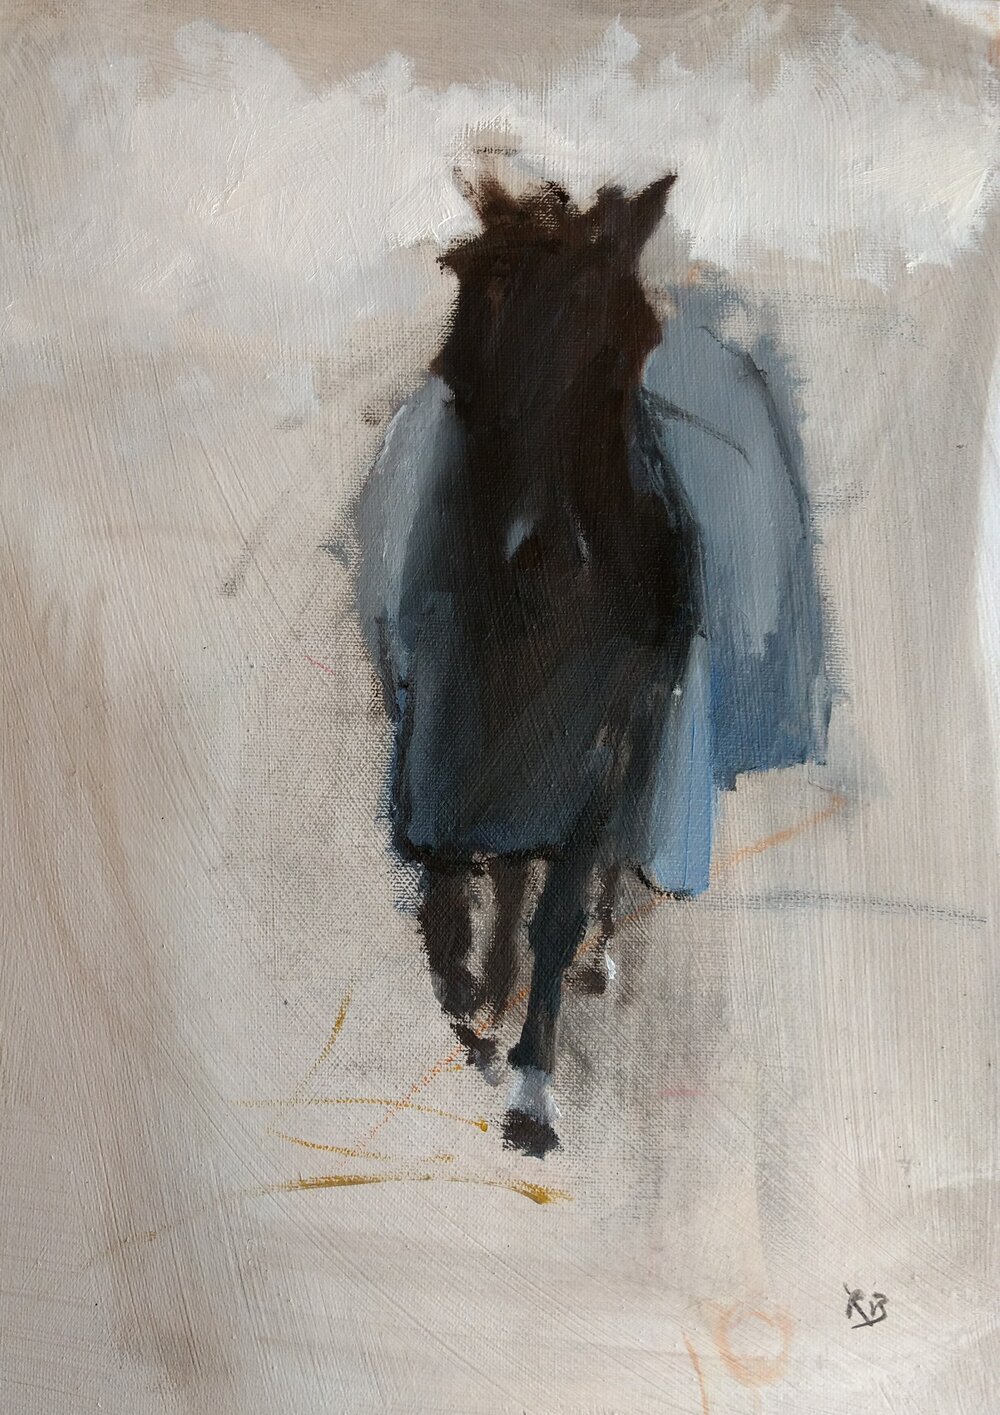  Horse in a blue coat  Oil on board  30x40 cms  SOLD  A horse in a blue coat coming briskly towards the viewer almost silhouetted against a misty background makes a dramatic statement. 